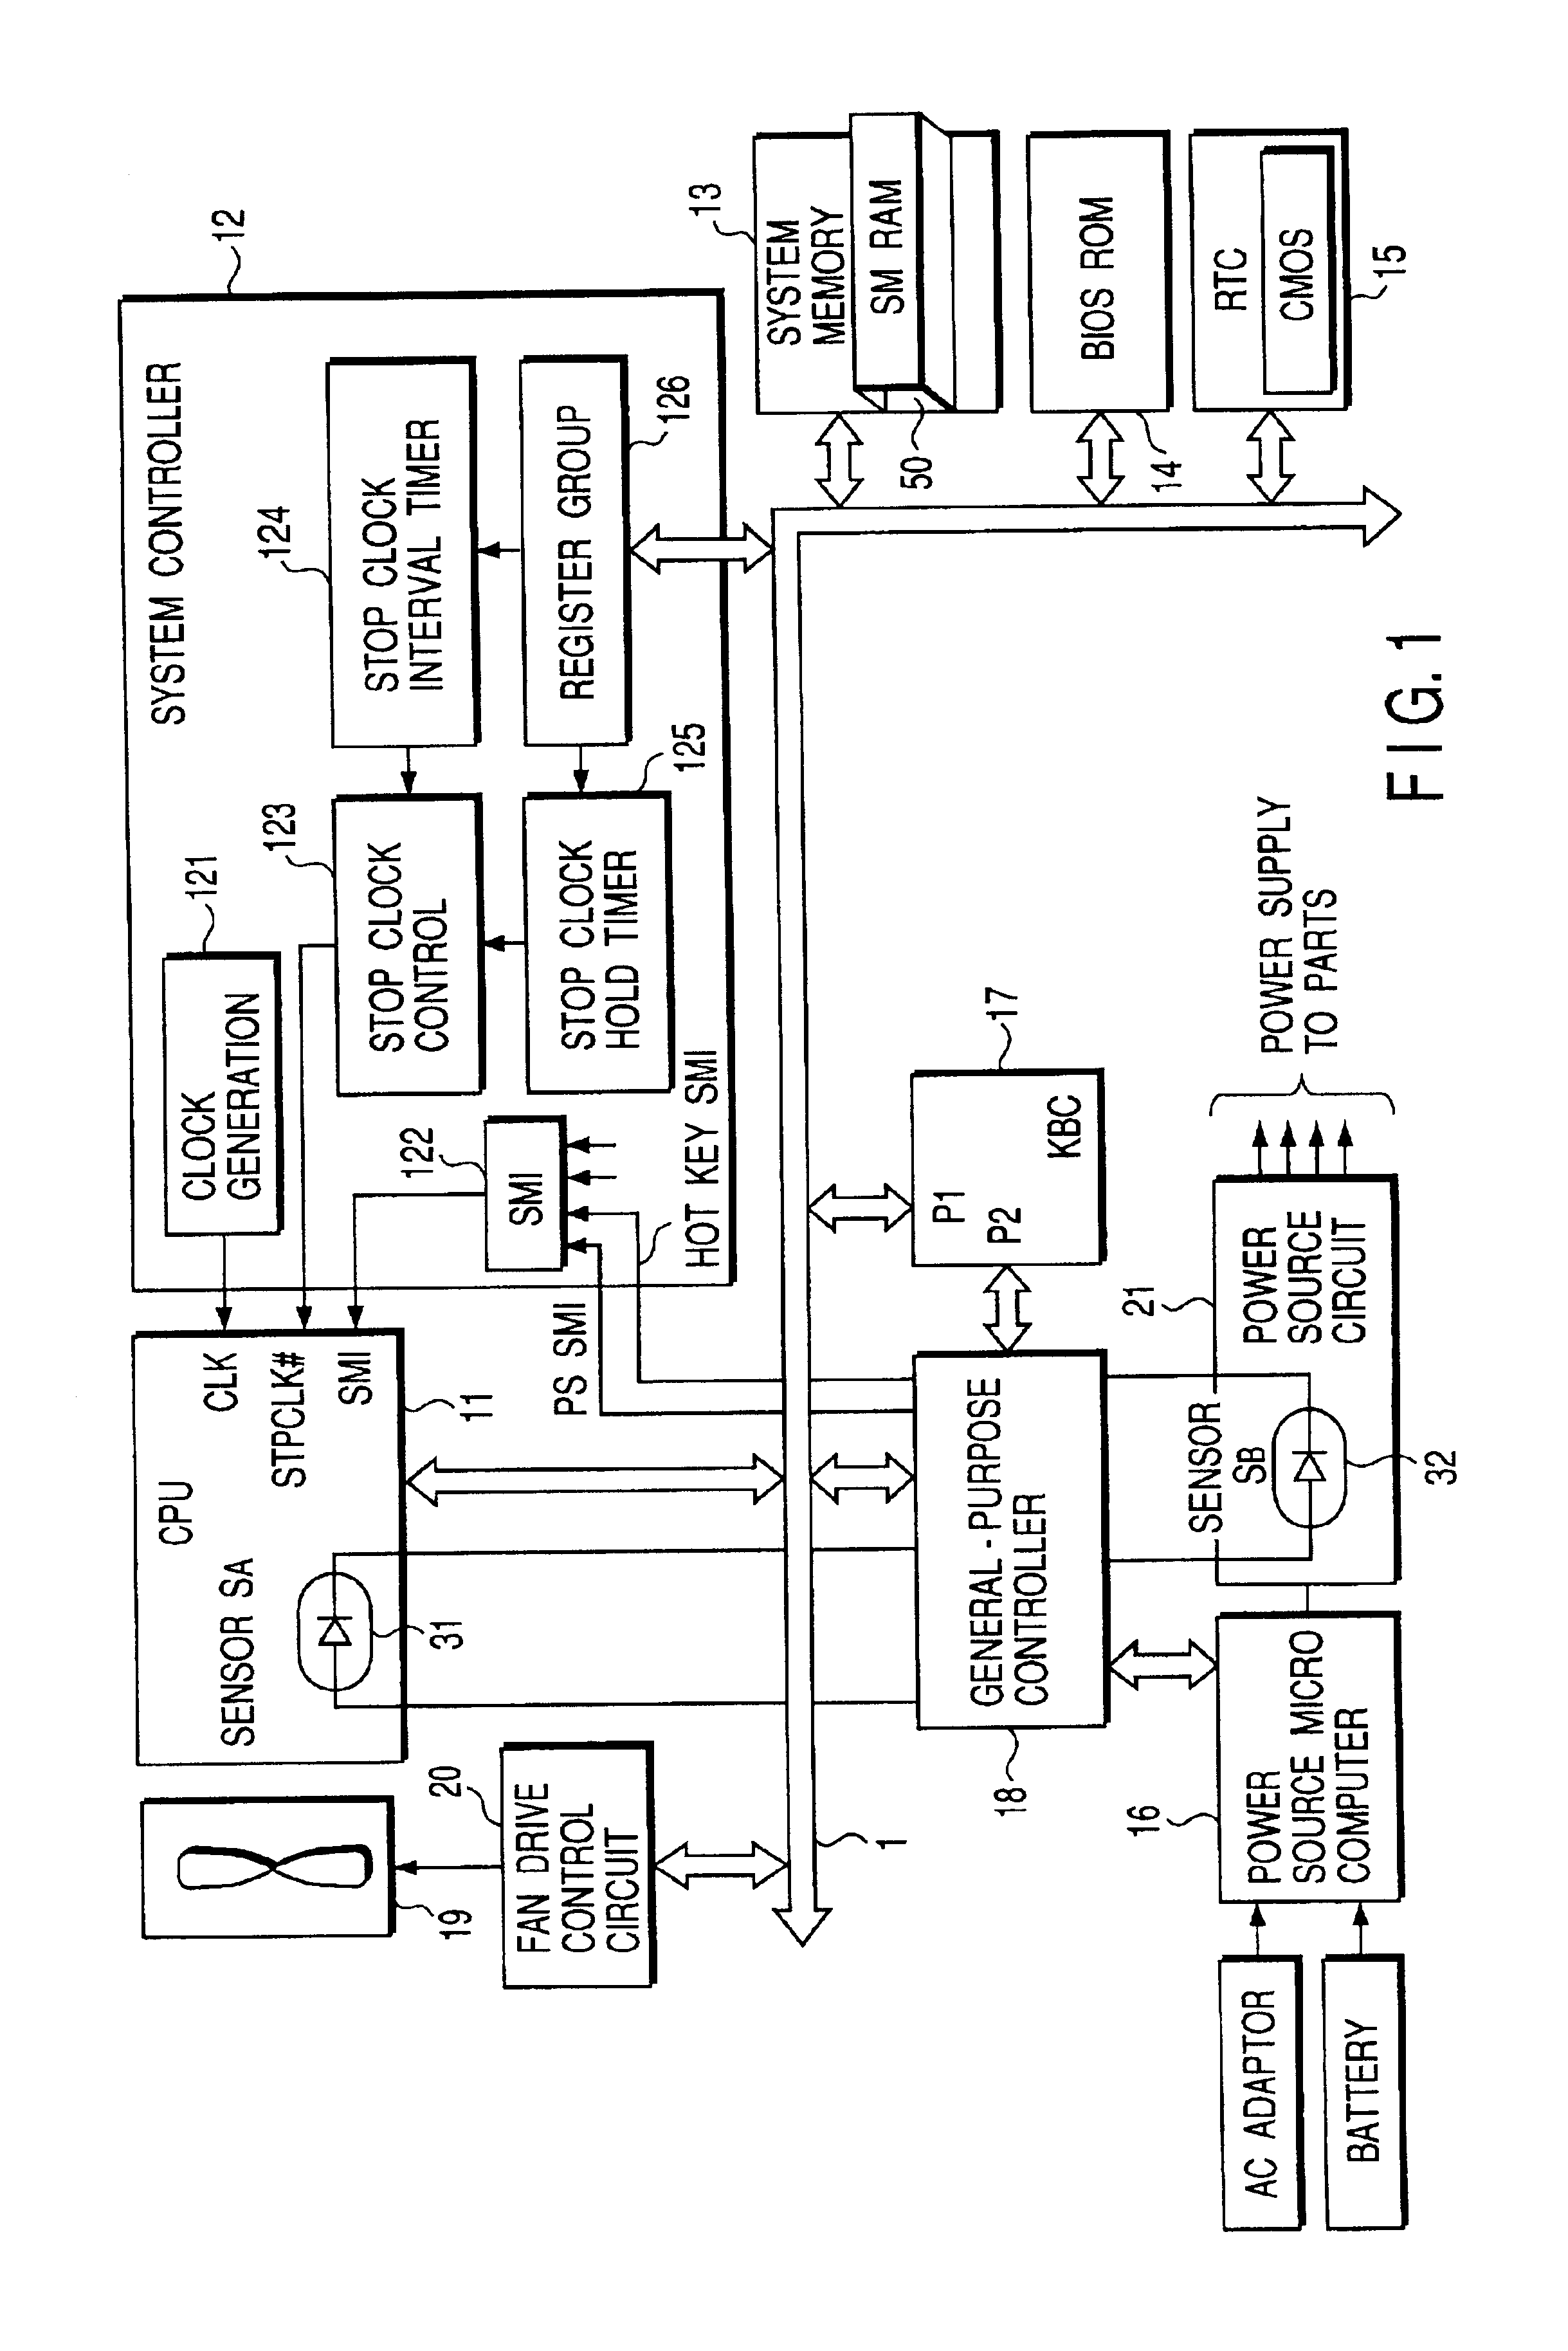 Computer system and method of controlling rotation speed of cooling fan